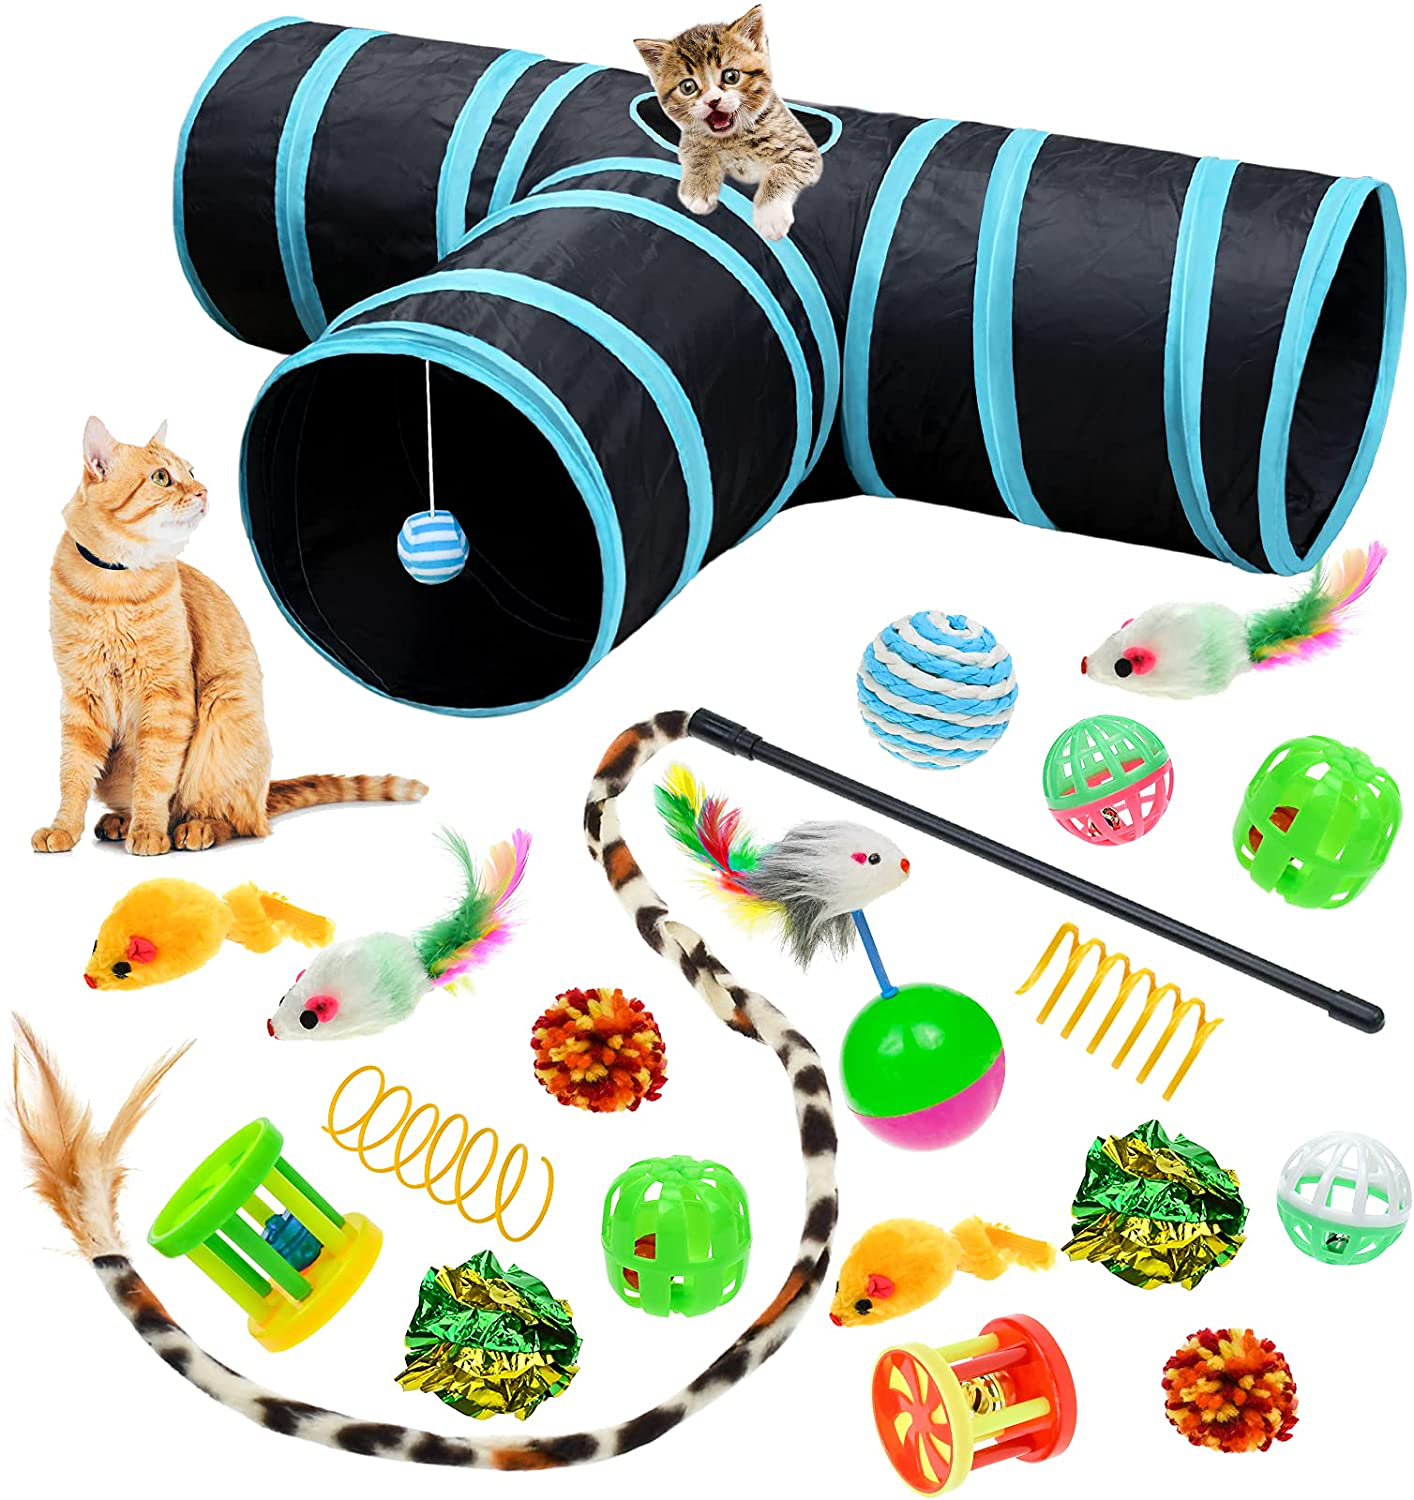 Malier 20 PCS Cat Kitten Toys Set, Collapsible Cat Tunnels for Indoor Cats, Interactive Cat Feather Toy Fluffy Mouse Crinkle Balls Cat 3 Way Tube Tunnel Toys for Cat Puppy Kitty Kitten Animals & Pet Supplies > Pet Supplies > Cat Supplies > Cat Toys Malier Black  